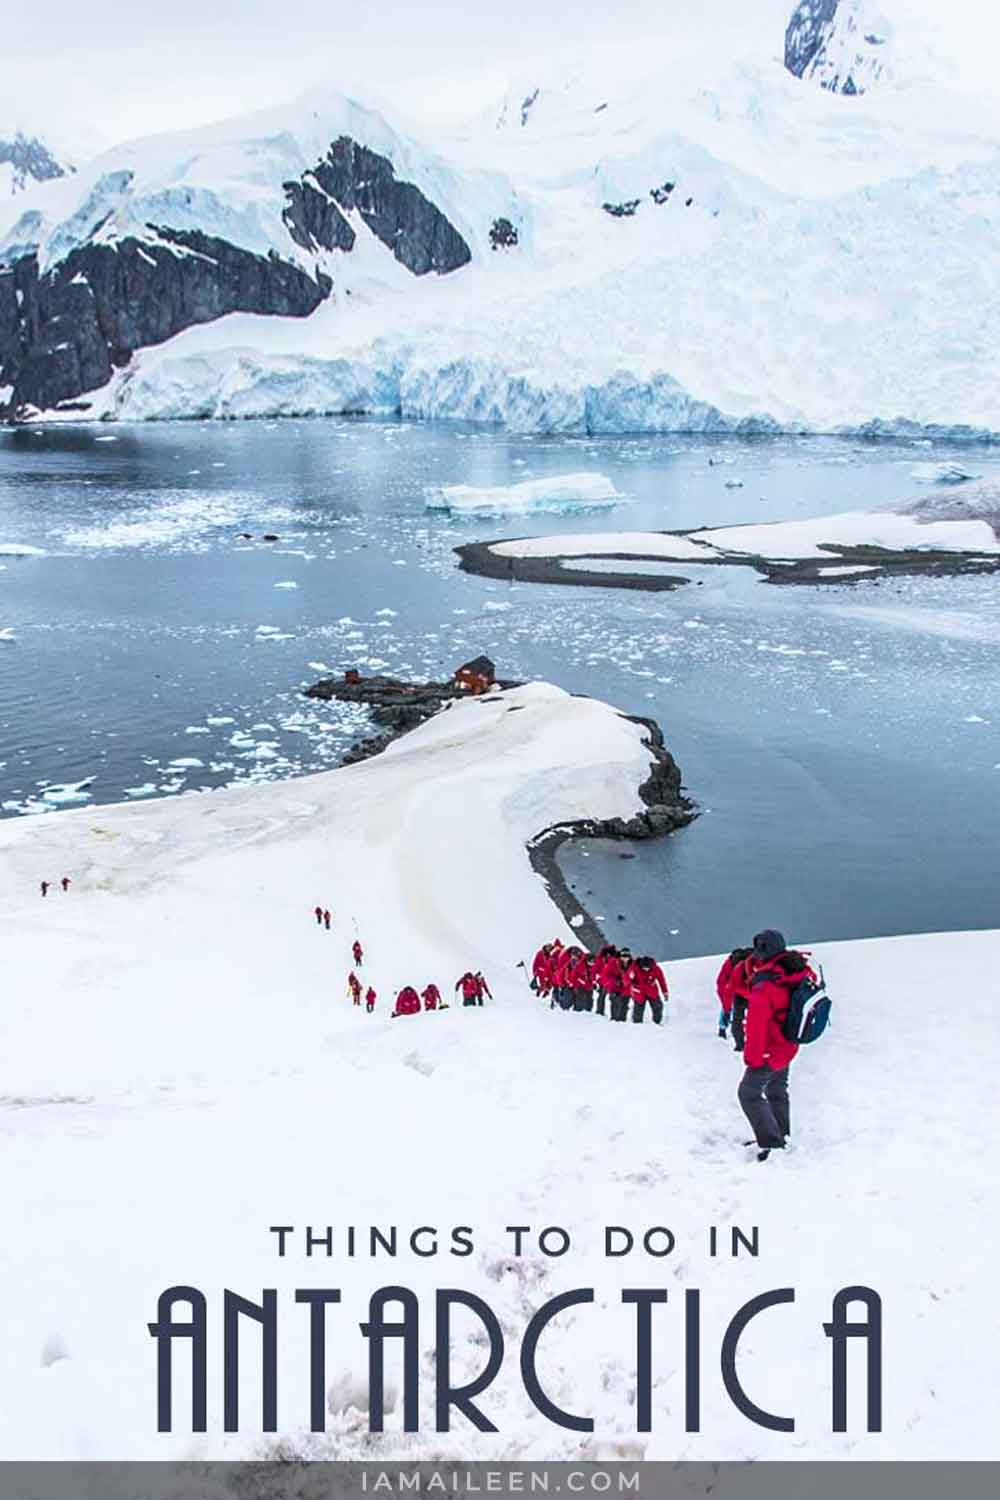 The Coolest Things to Do in Antarctica: The "White Continent"